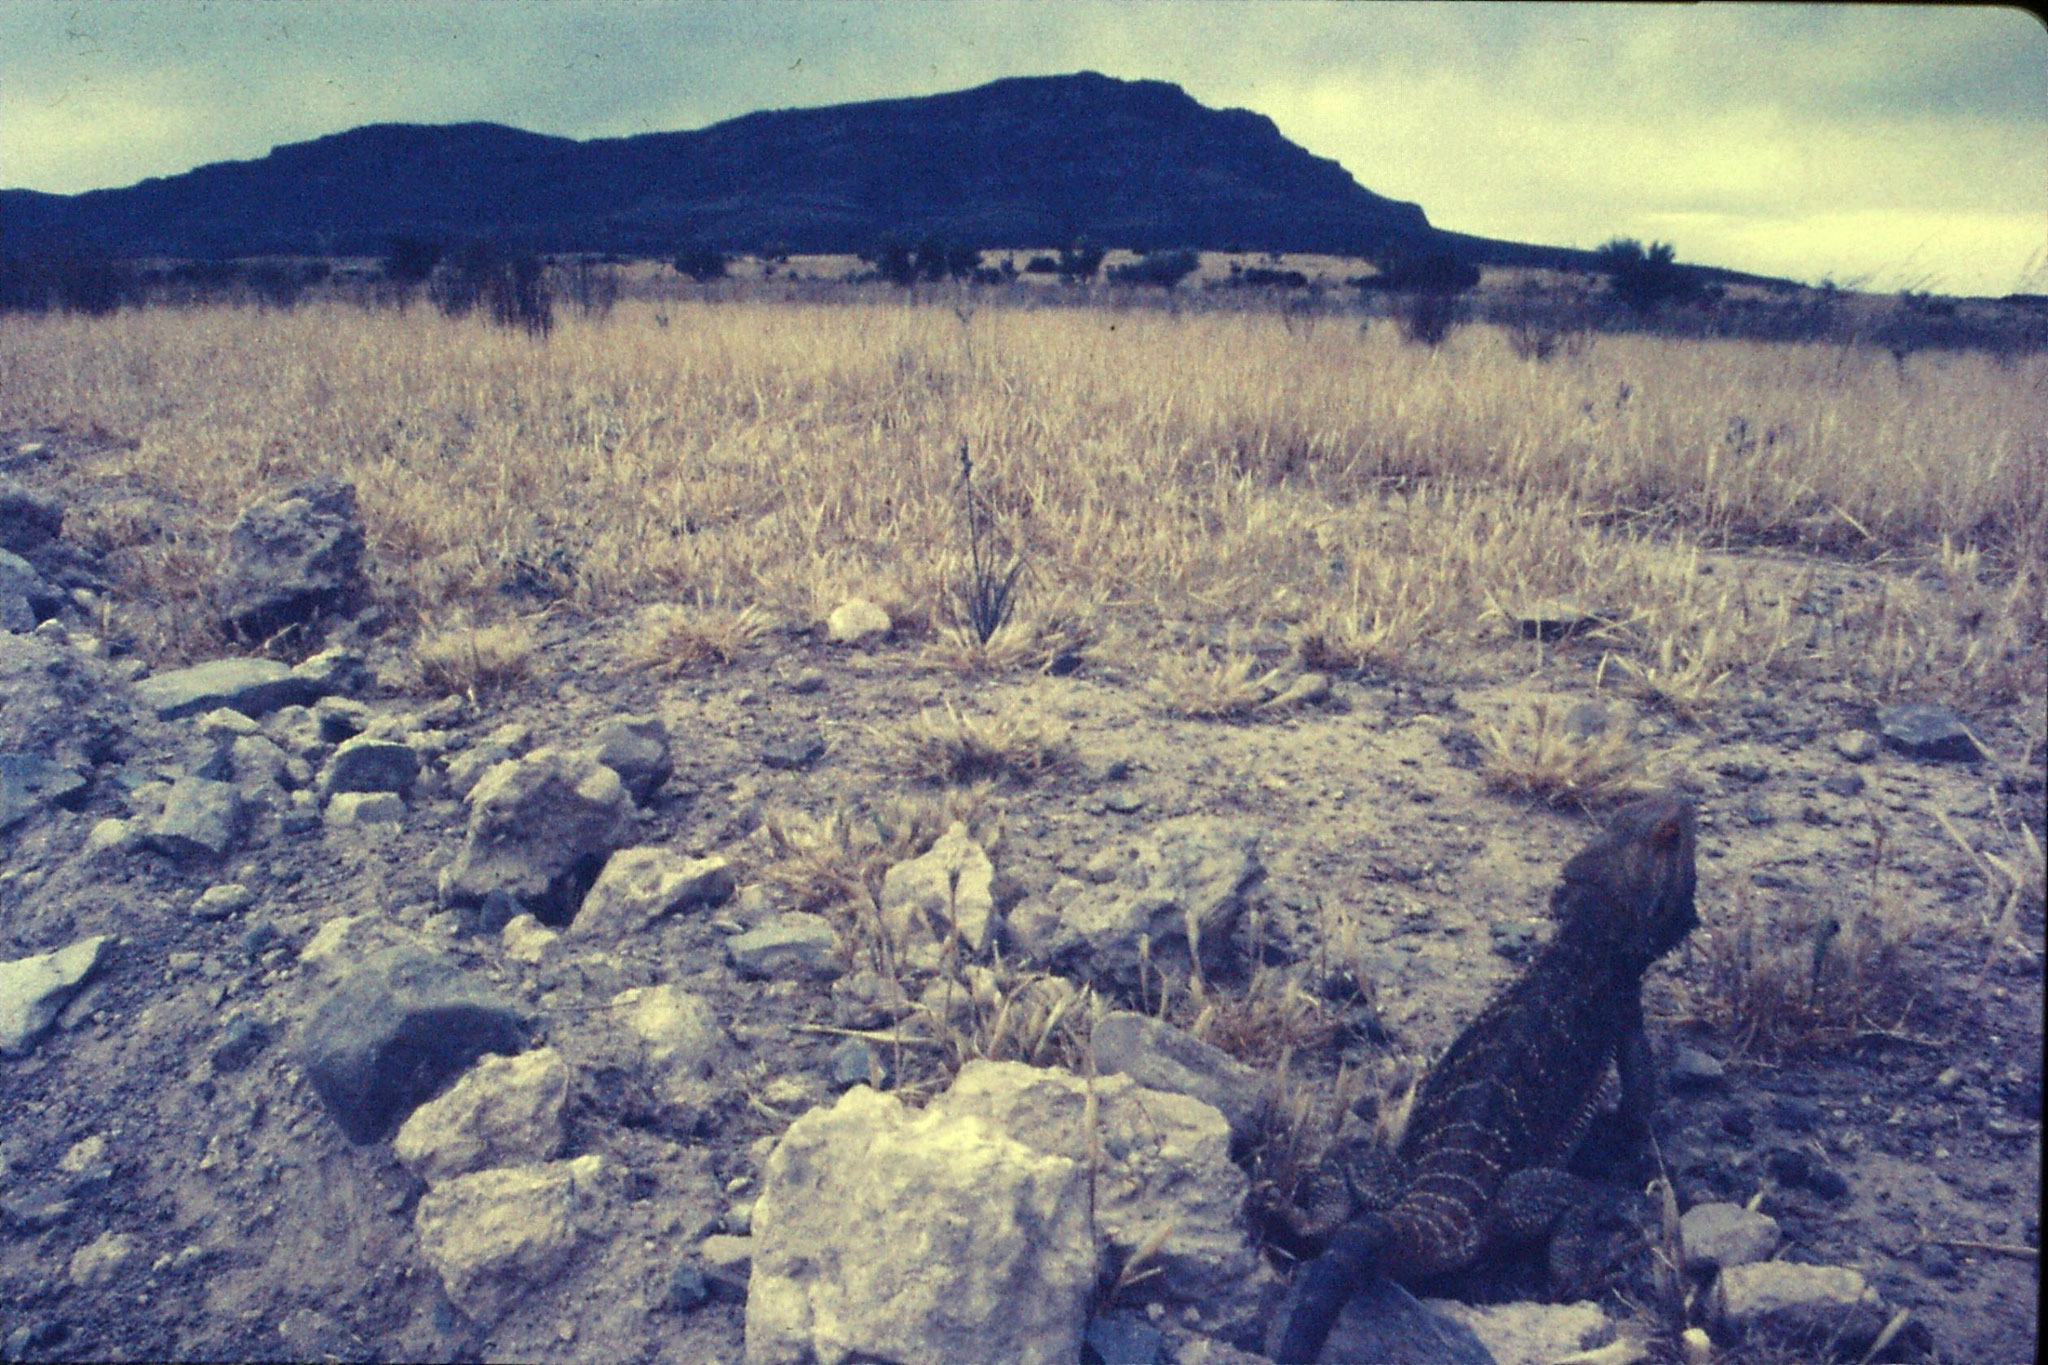 7/11/1990: 0: Flinders Ranges, Bearded dragon and ridge of Wilpena Pound